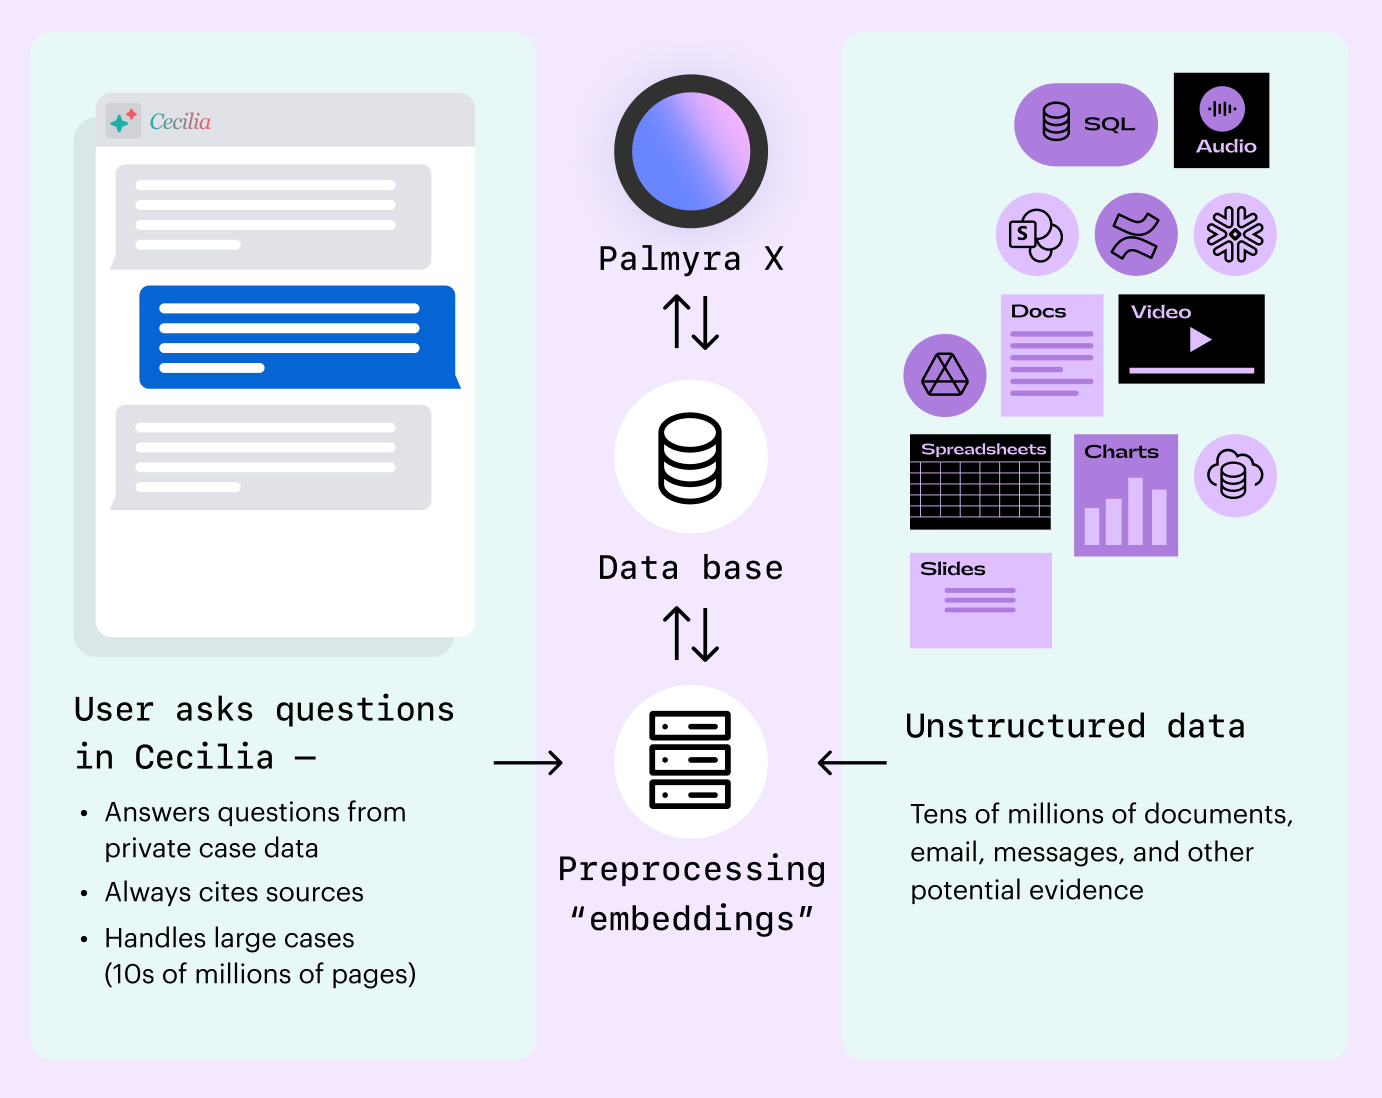 How DISCO uses Palmyra LLM to enable Cecilia

User asks questions in Cecilia
- Answers questions from private case data
- Always cites sources
- Handles large cases  (10s of millions of pages)

Unstructured data
Tens of millions of documents, email, messages, and other potential evidence